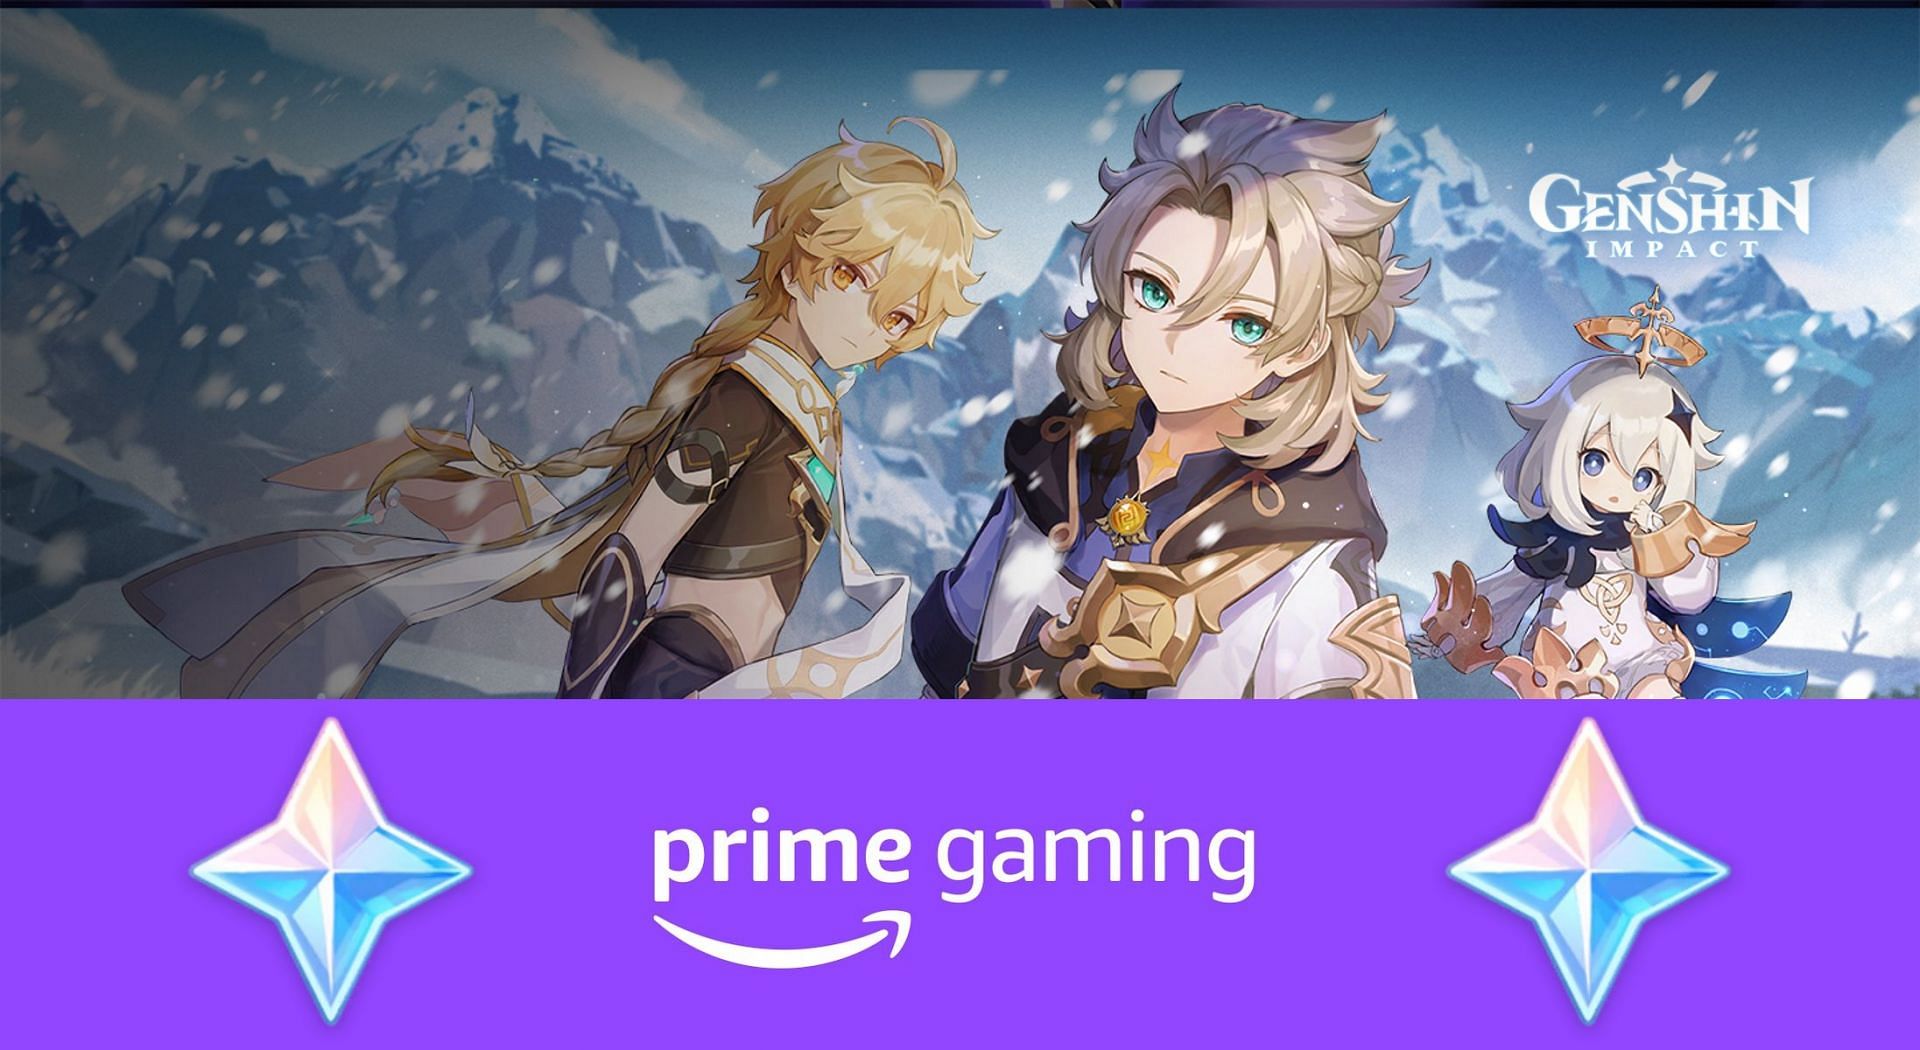 Prime Gaming on X: Don't miss out on the @genshinimpact #PrimeGaming  Bundle which is free with your benefits 👑  The game  has been nominated for @thegameawards this year, so head to